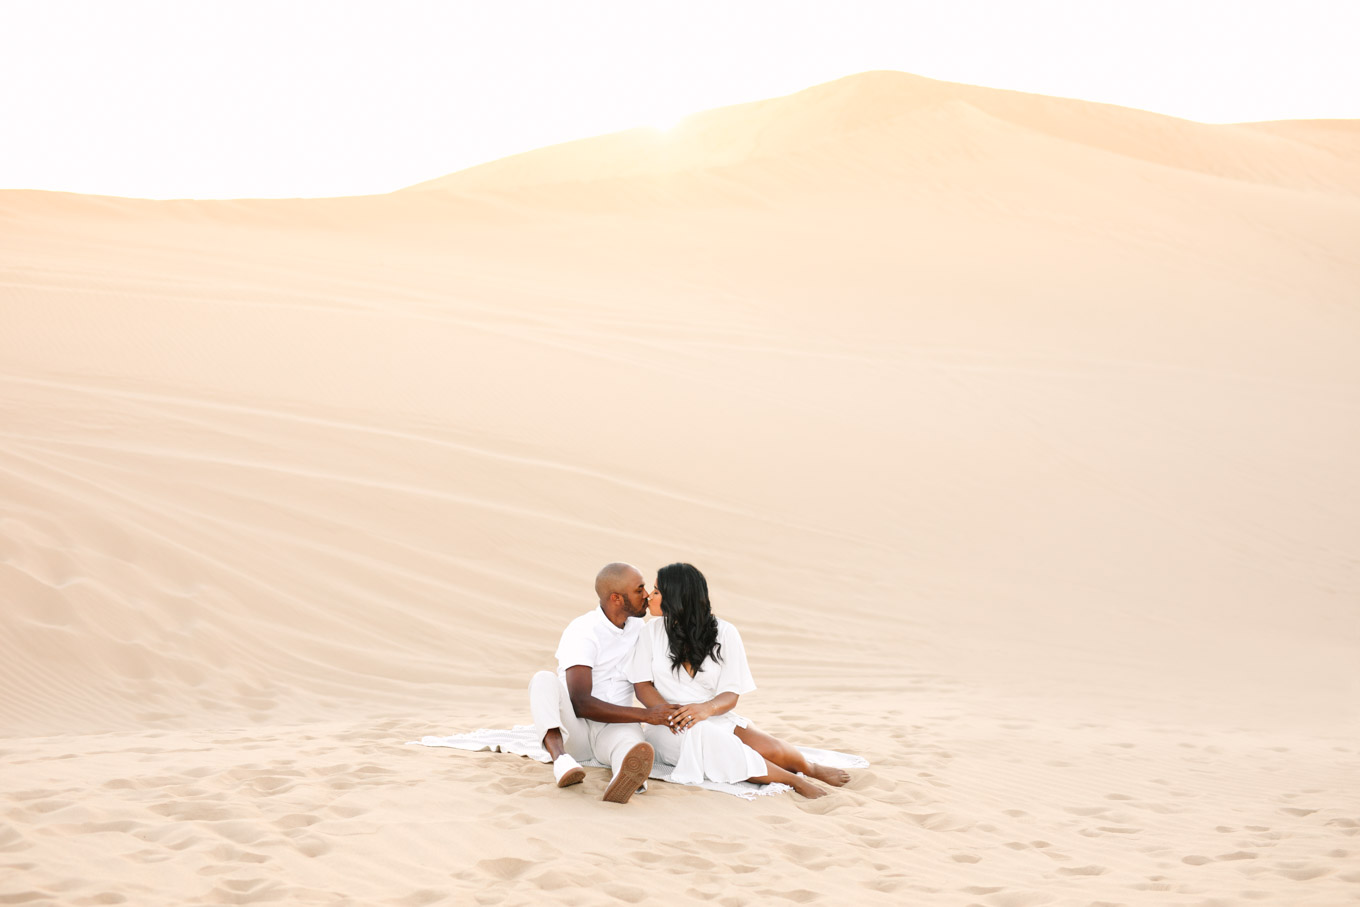 Engaged couple sharing a kiss on sand dune | California Sand Dunes engagement session | Colorful Palm Springs wedding photography | #palmspringsphotographer #sanddunes #engagementsession #southerncalifornia  Source: Mary Costa Photography | Los Angeles